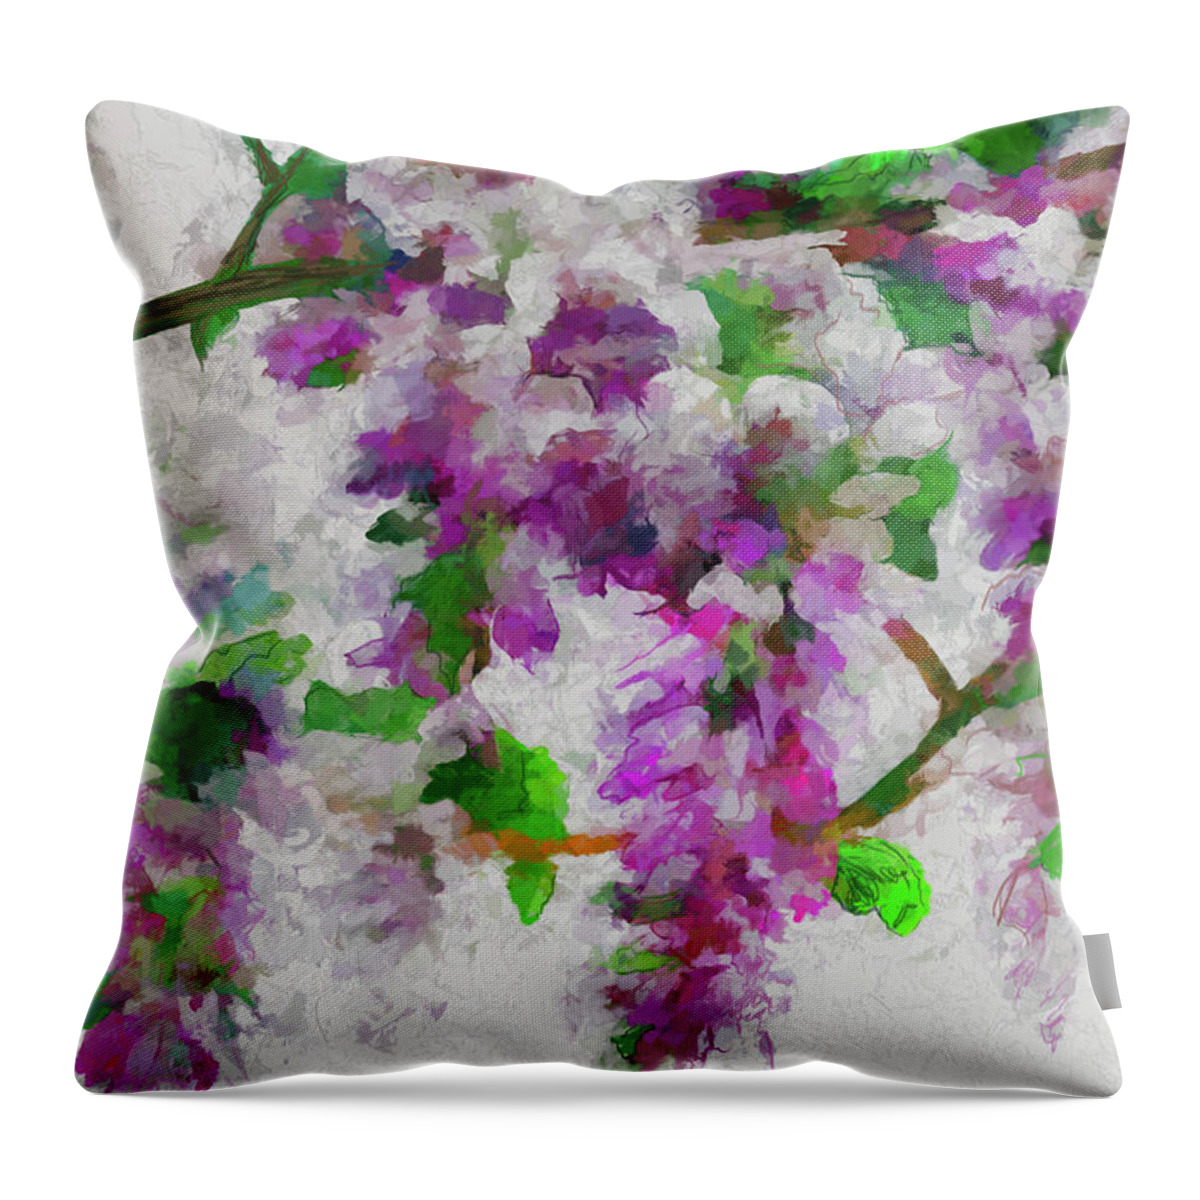 Wisteria Throw Pillow featuring the digital art Wisteria Branch by Bonnie Willis